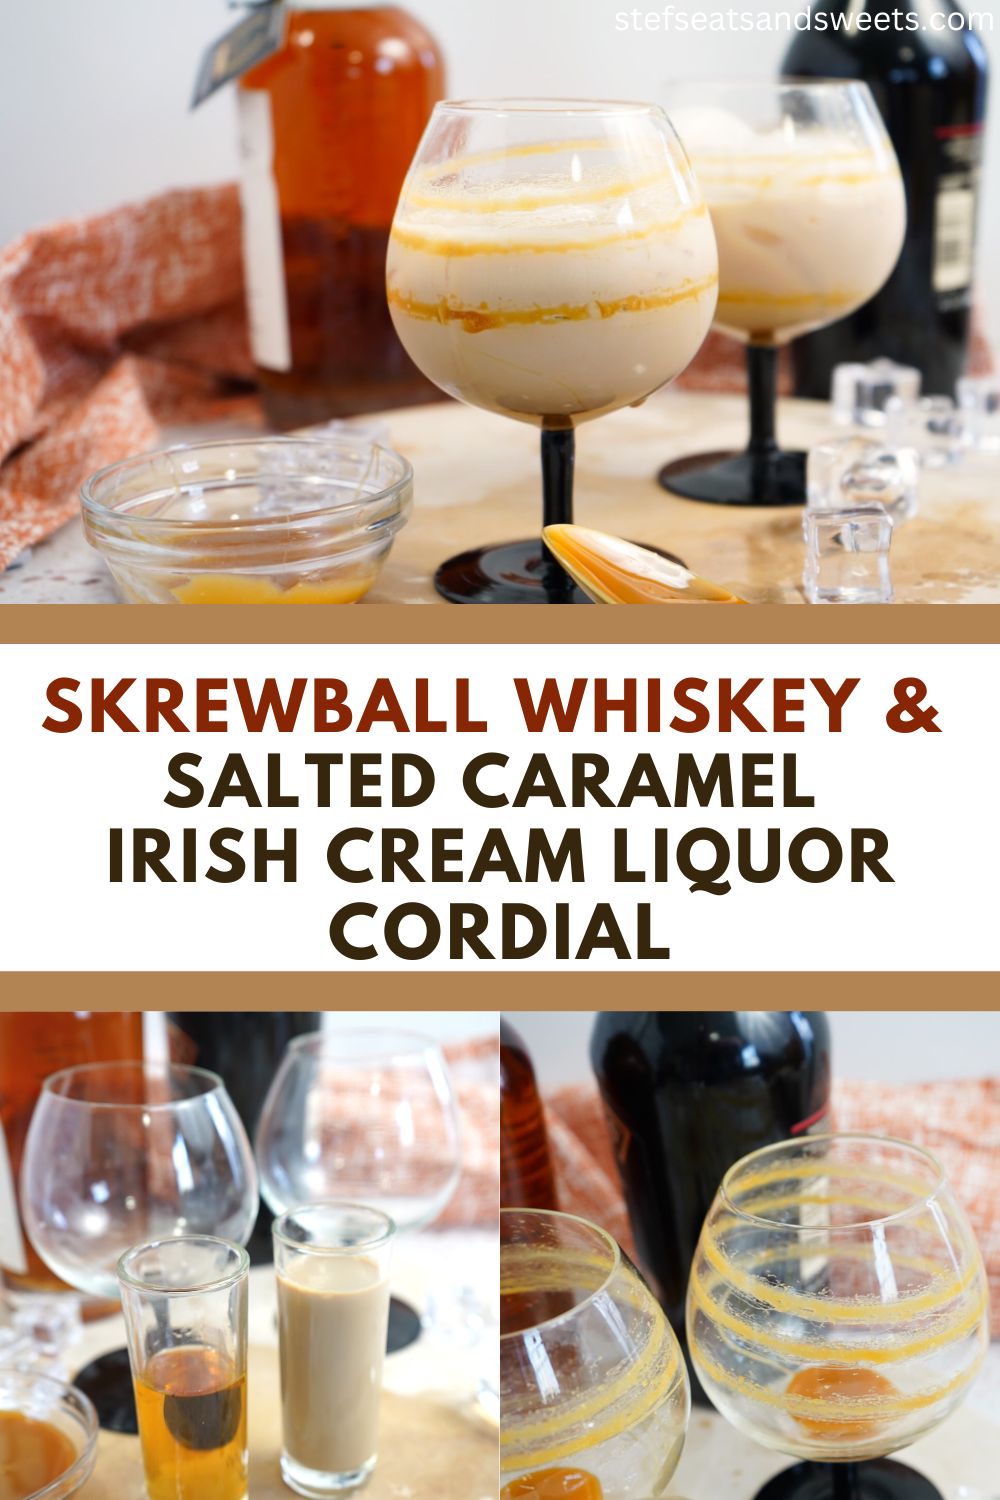 Salted caramel and whiskey cordial